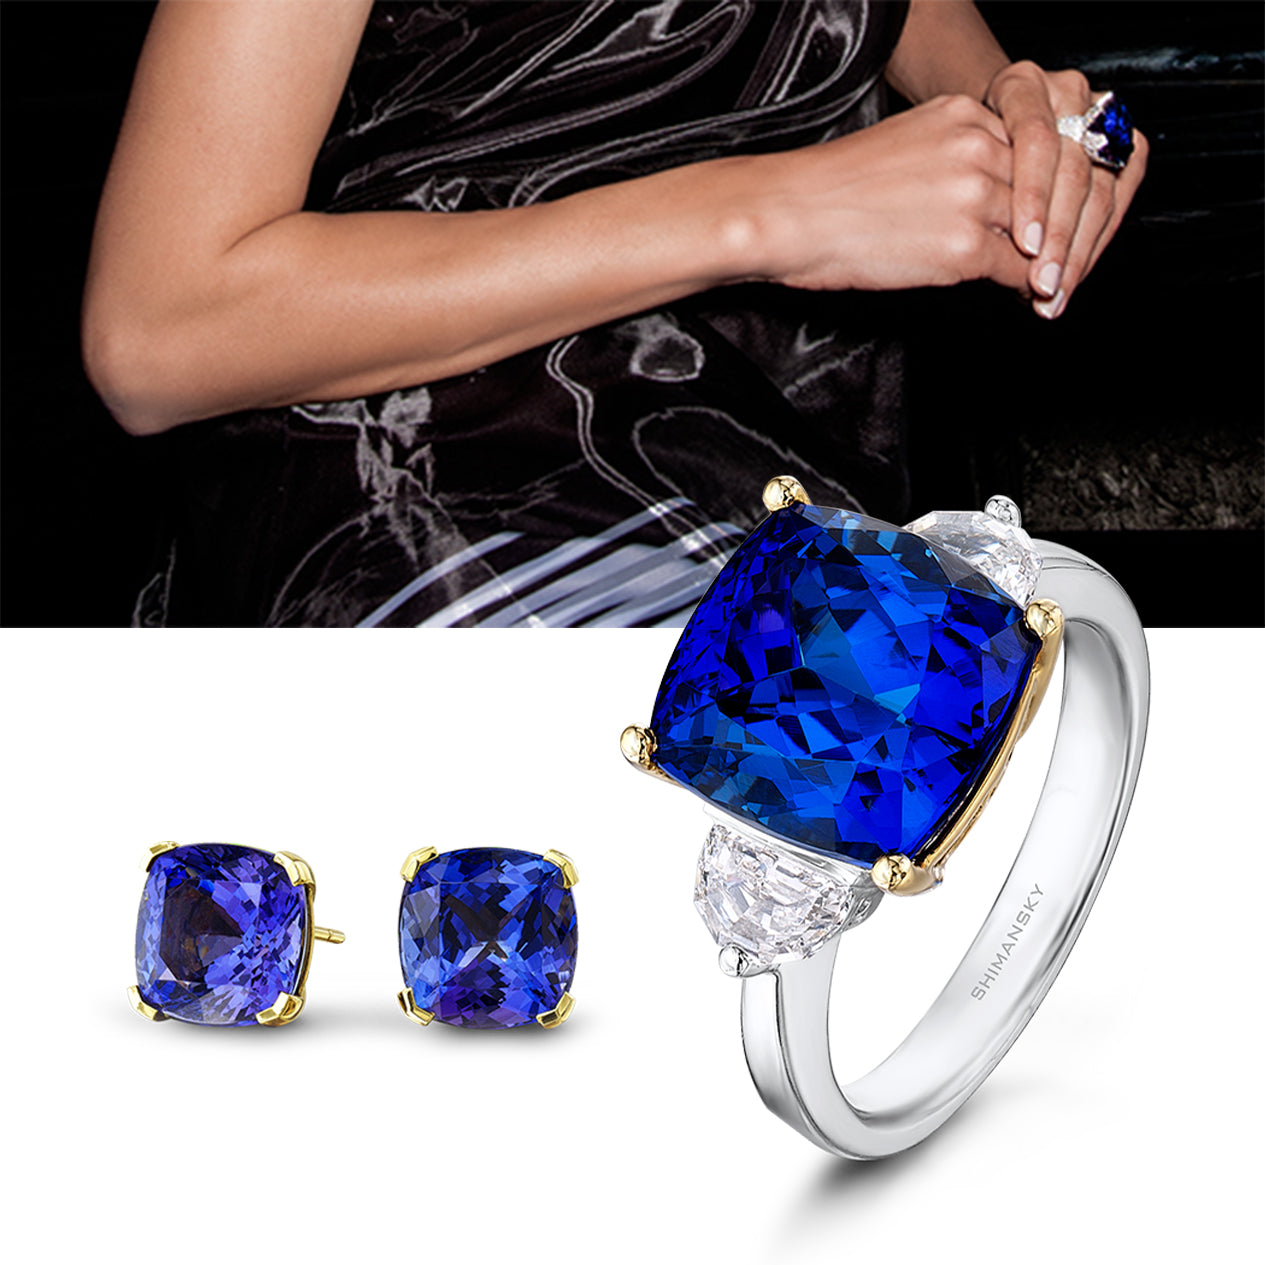 Exclusive Shimansky Tanzanite and Diamond Earrings and Trilogy Ring